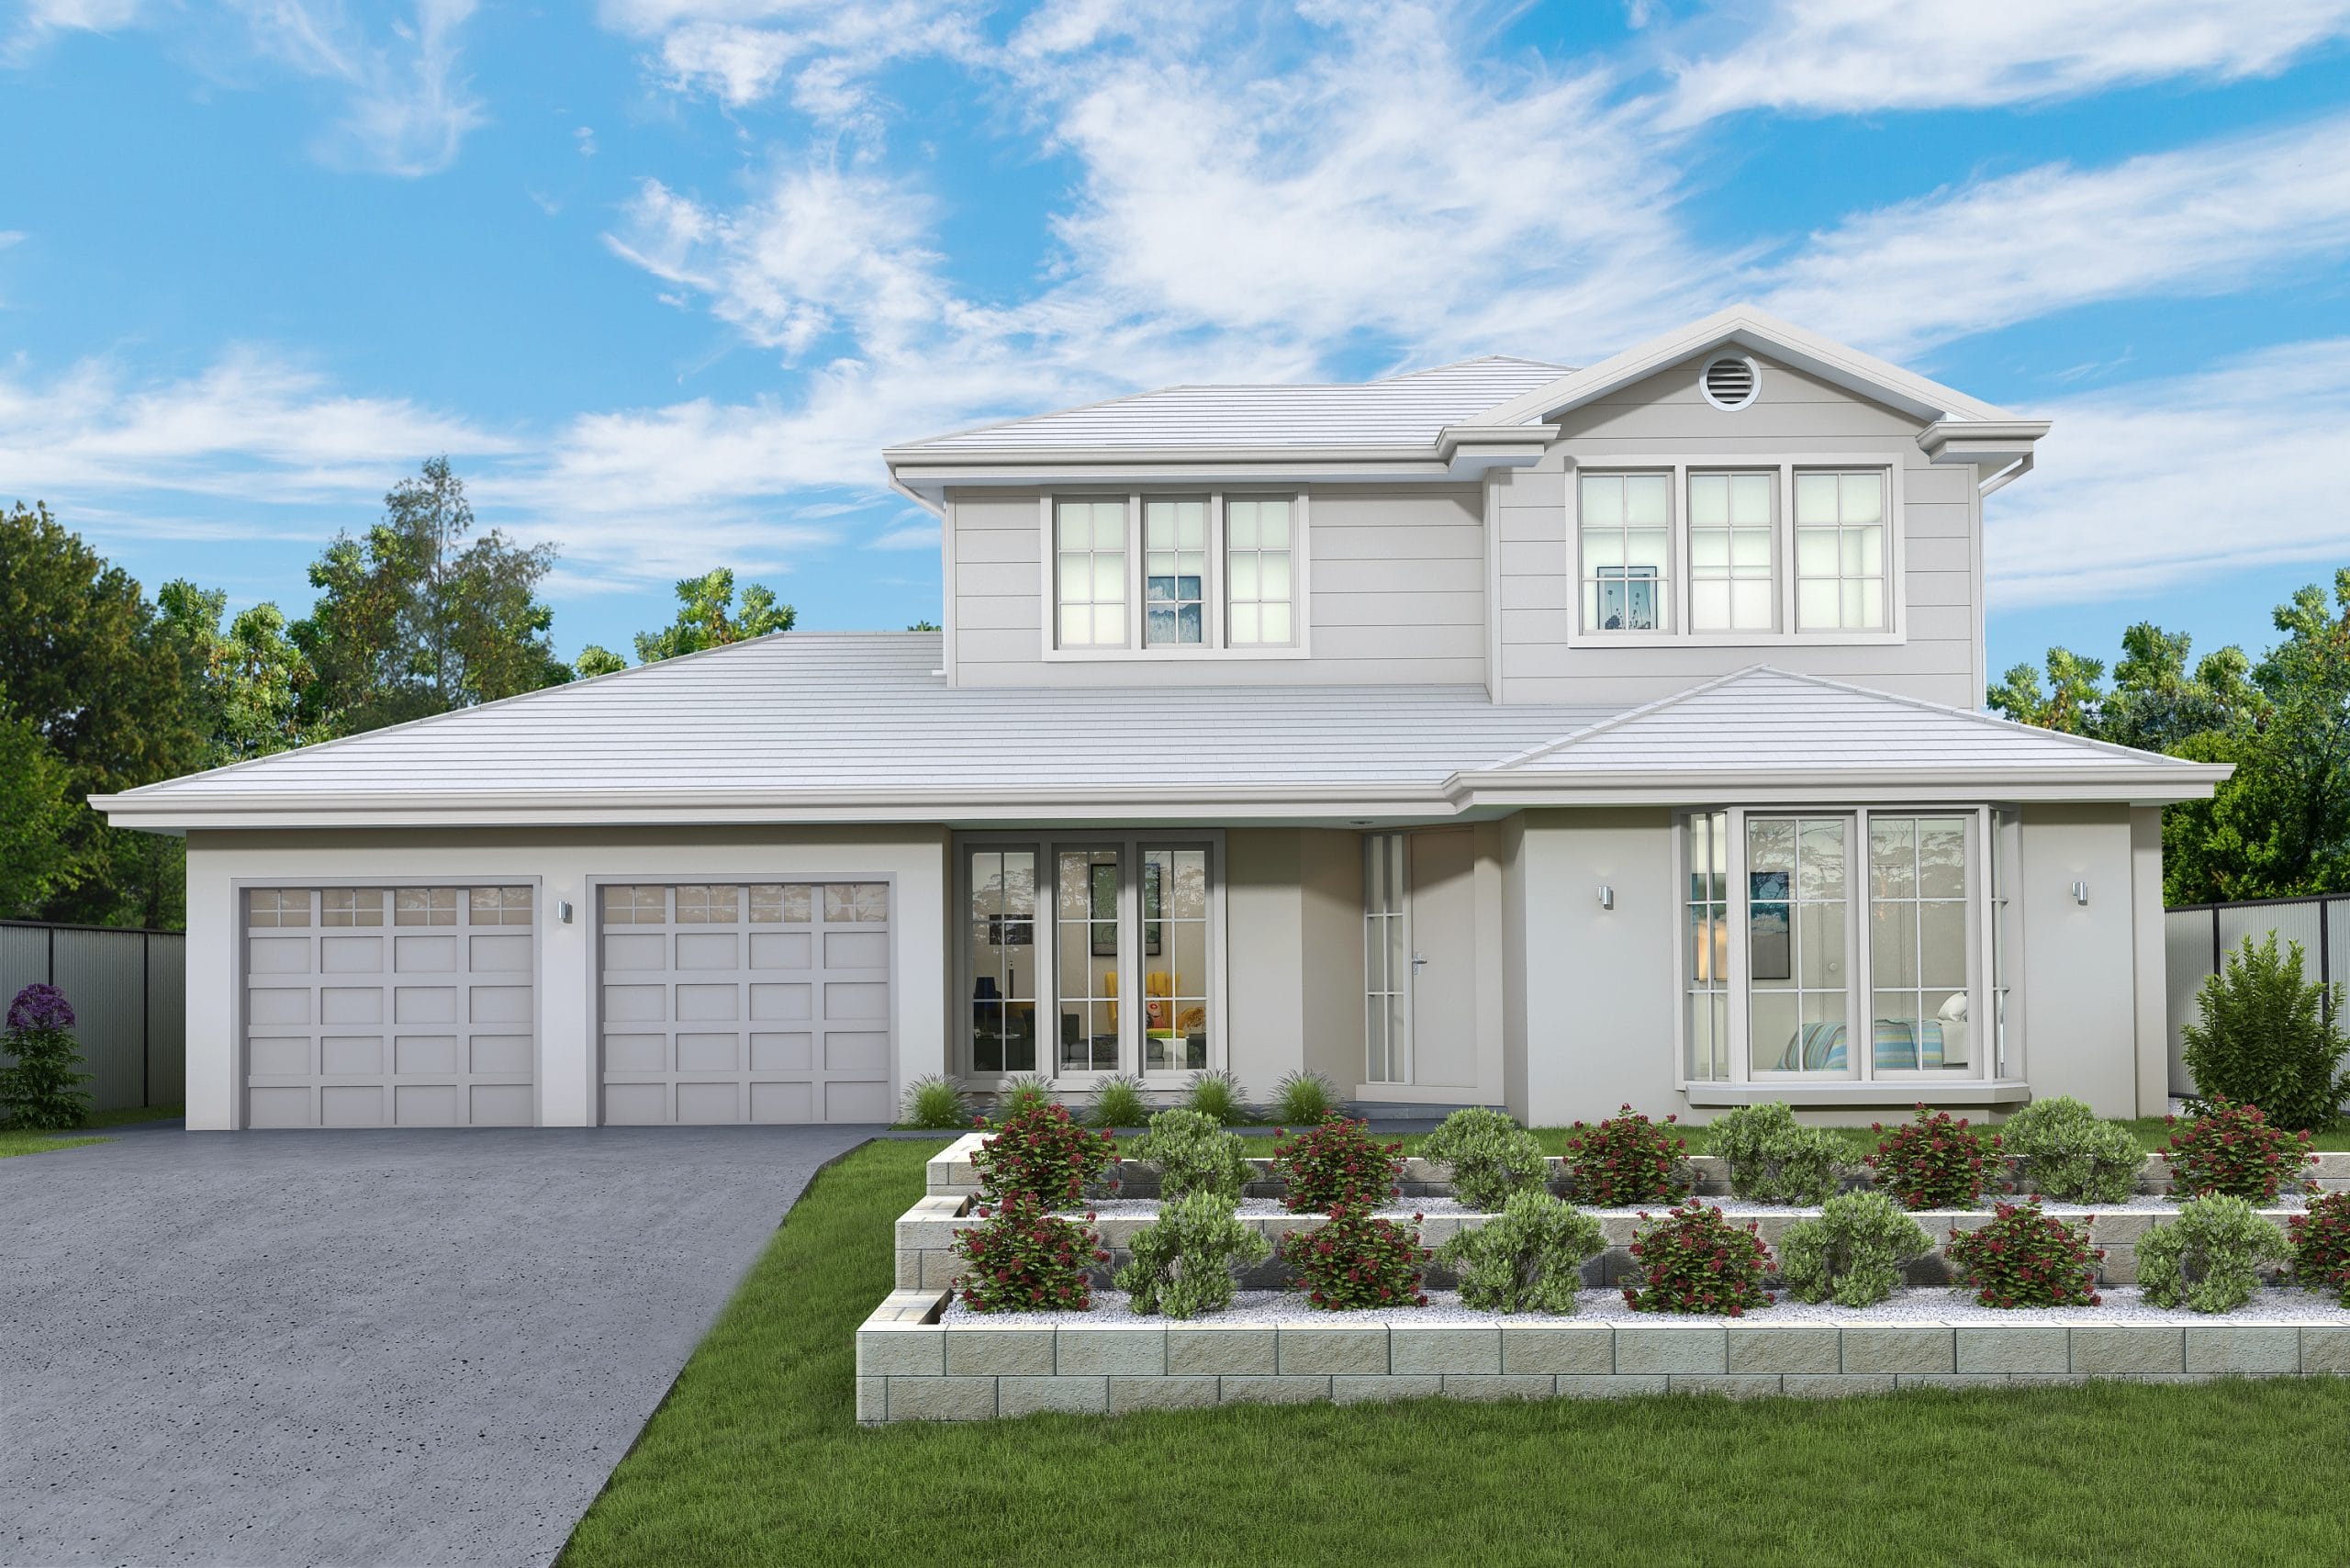 Render of a hampton style, first floor addition to a home in Glenwood